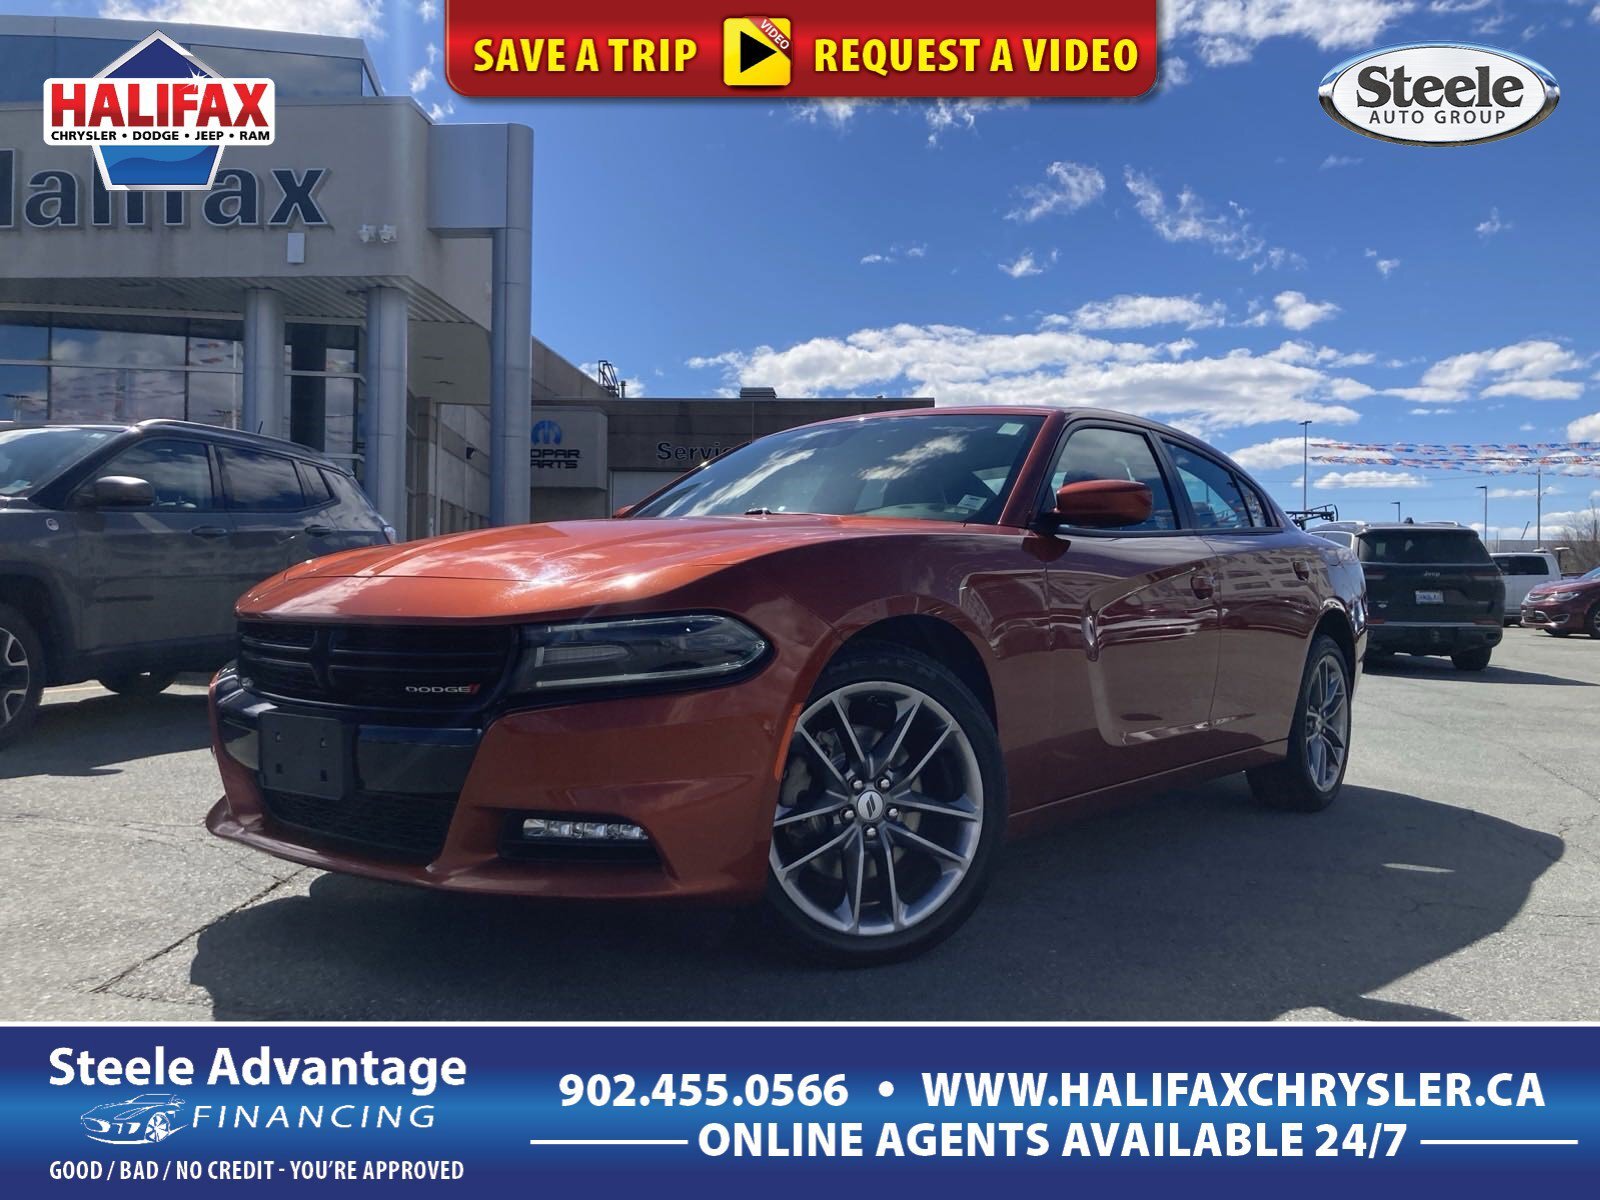 2021 Dodge Charger SXT - AWD, HTD MEMORY LEATHER SEATS, SUNROOF, NAV